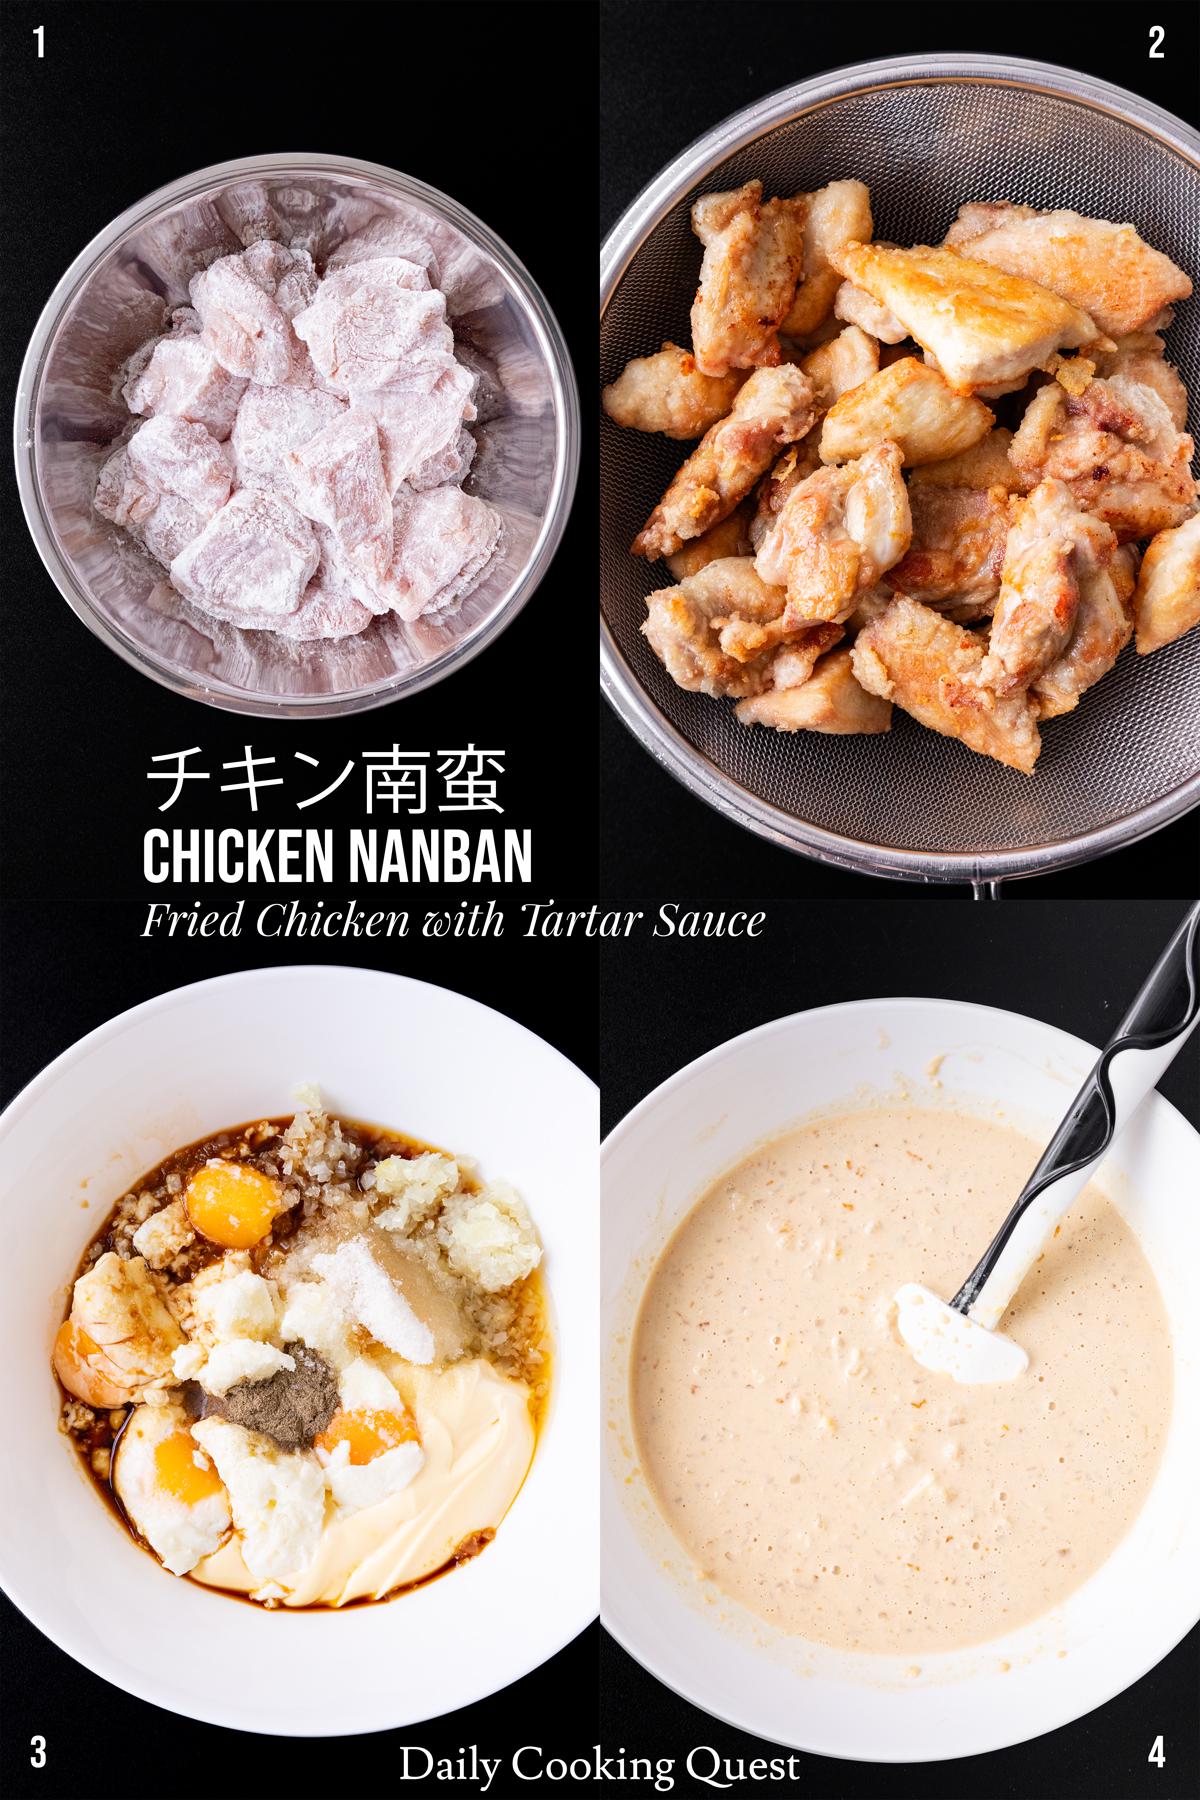 Chicken Nanban - Fried Chicken with Tartar Sauce | Daily Cooking Quest